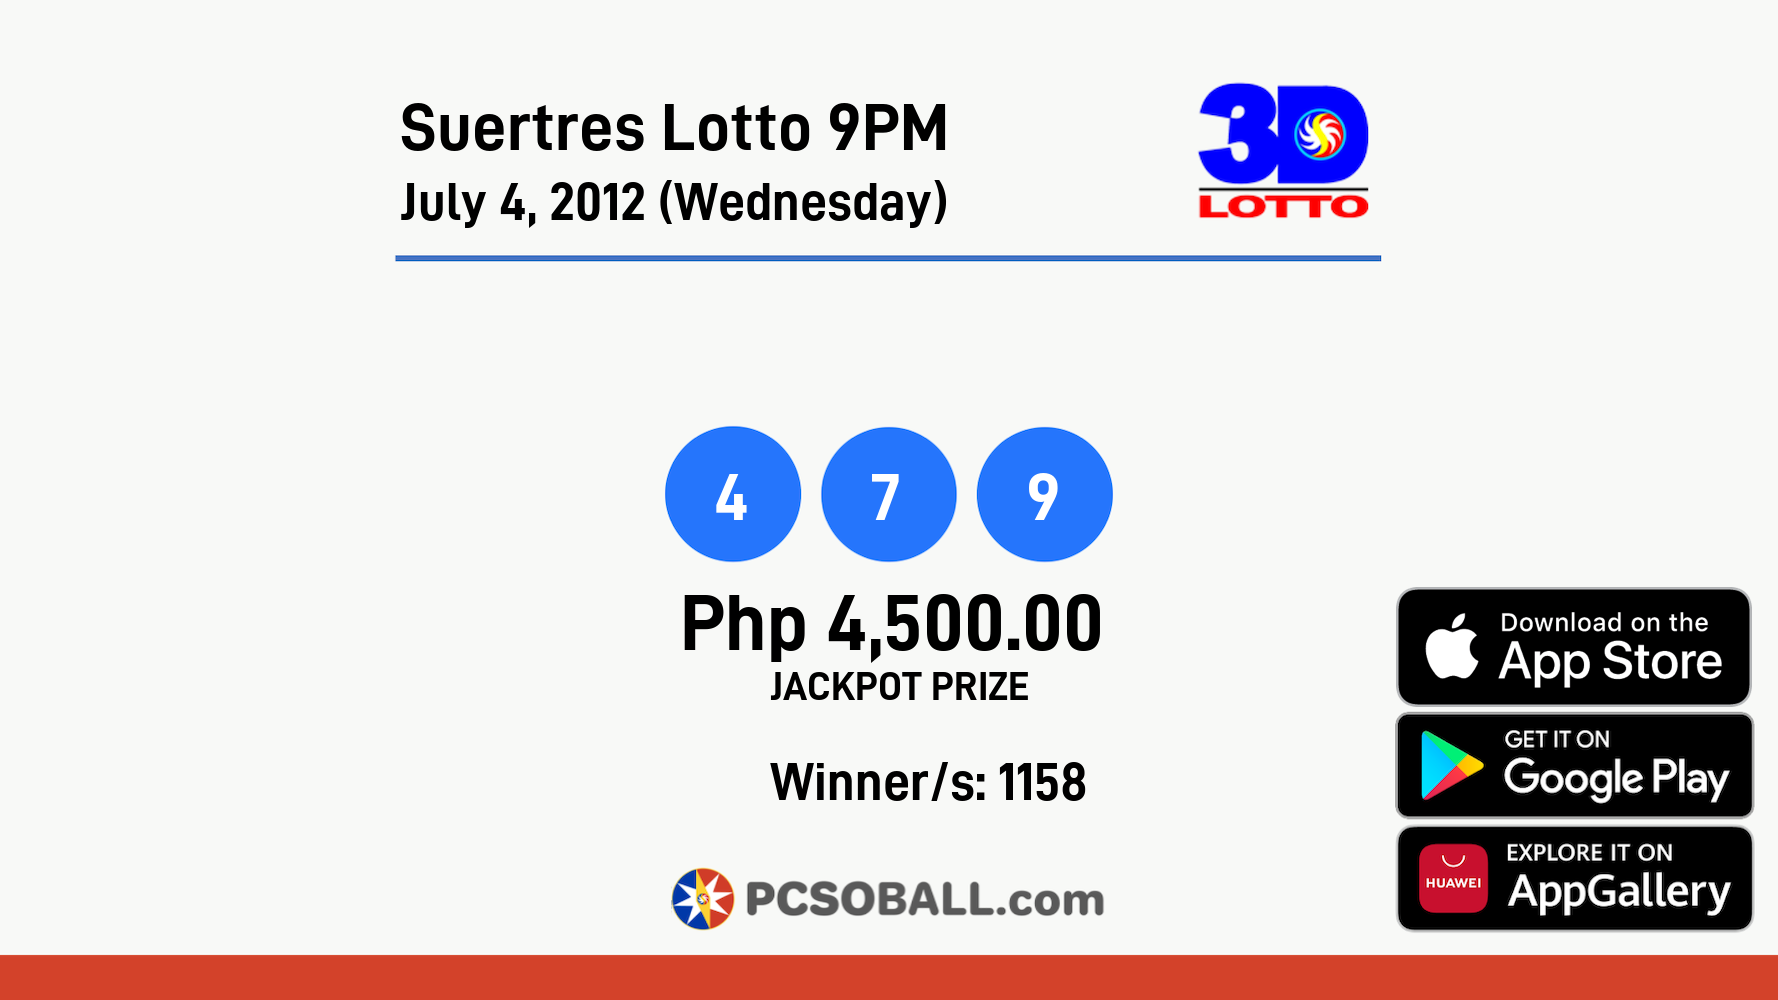 Suertres Lotto 9PM July 4, 2012 (Wednesday) Result